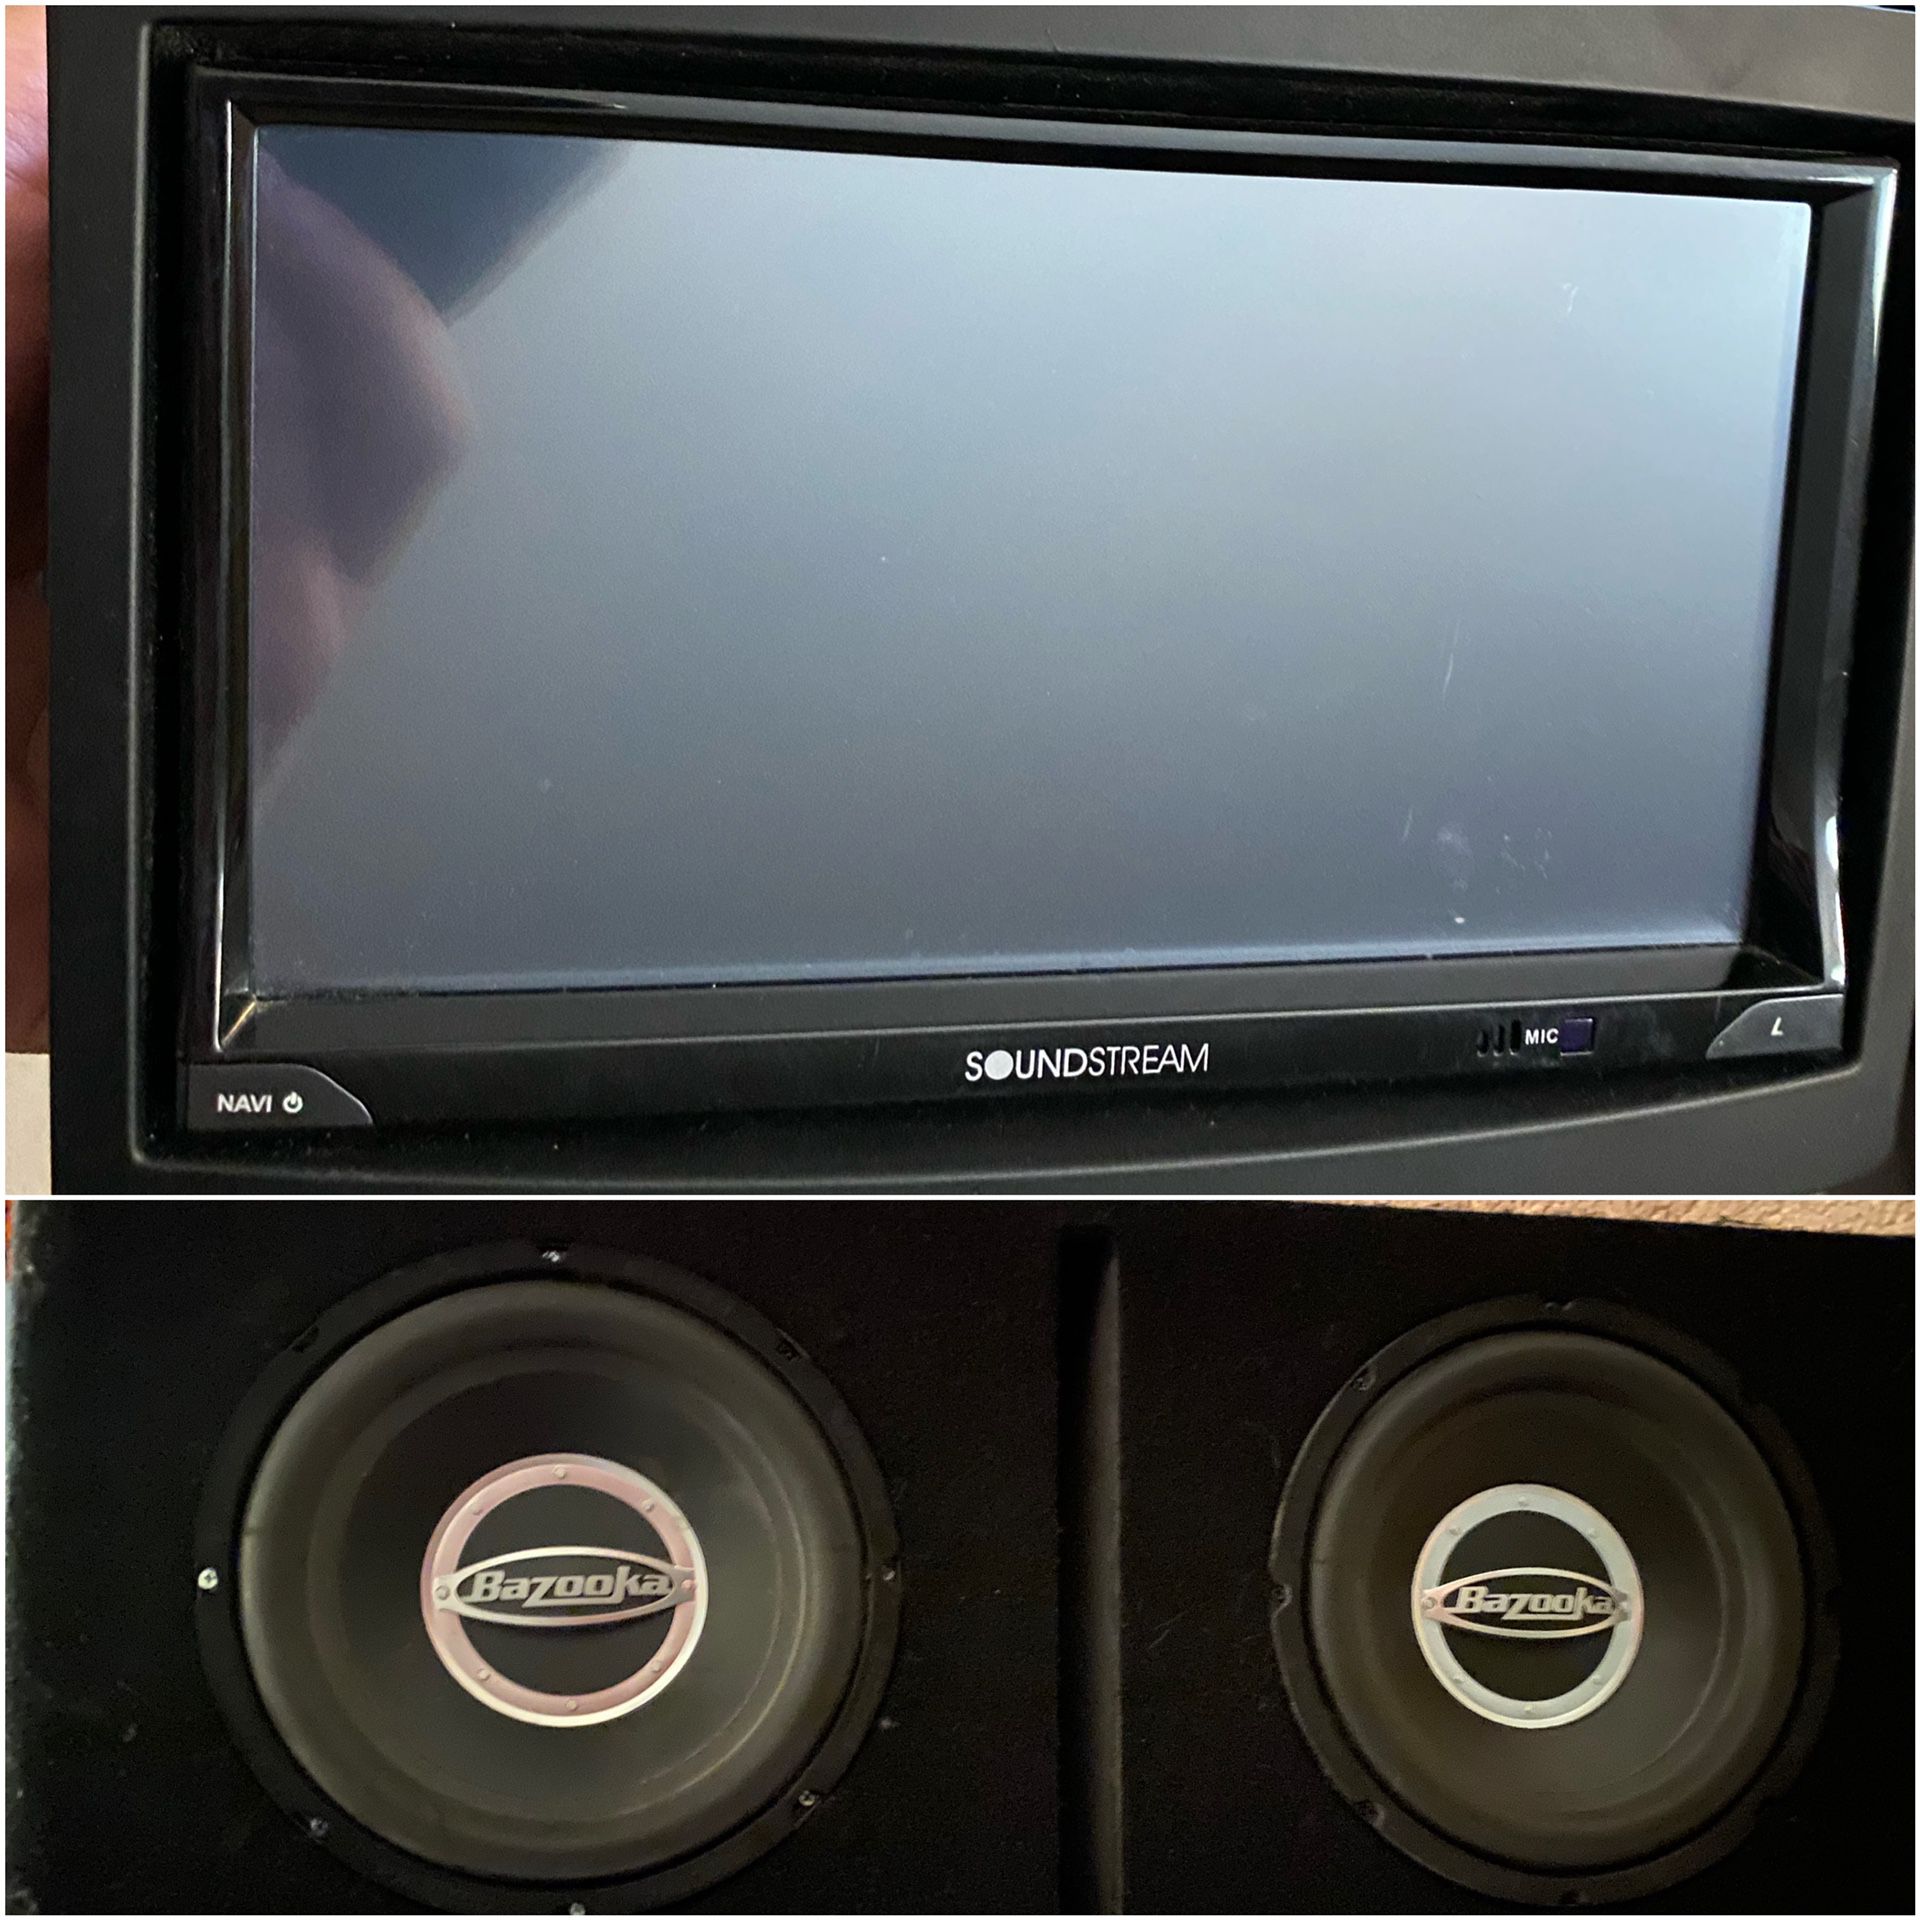 Double Din 7 inch Touchscreen & Subs with Amp